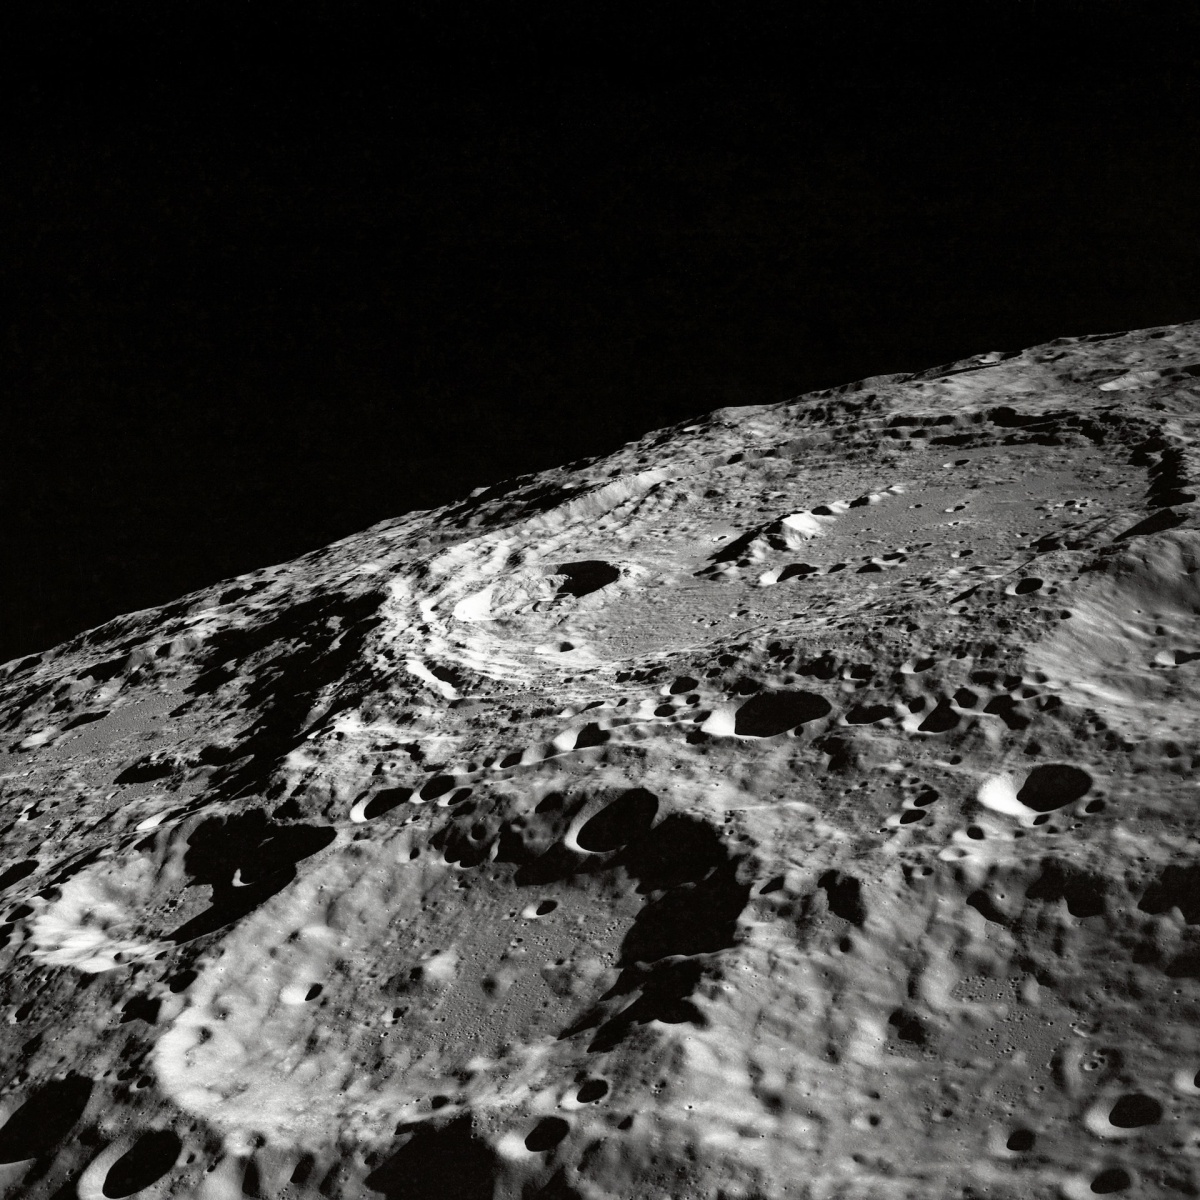 Japan Aims for Historic Moon 'Pinpoint Landing' in Global Lunar Race